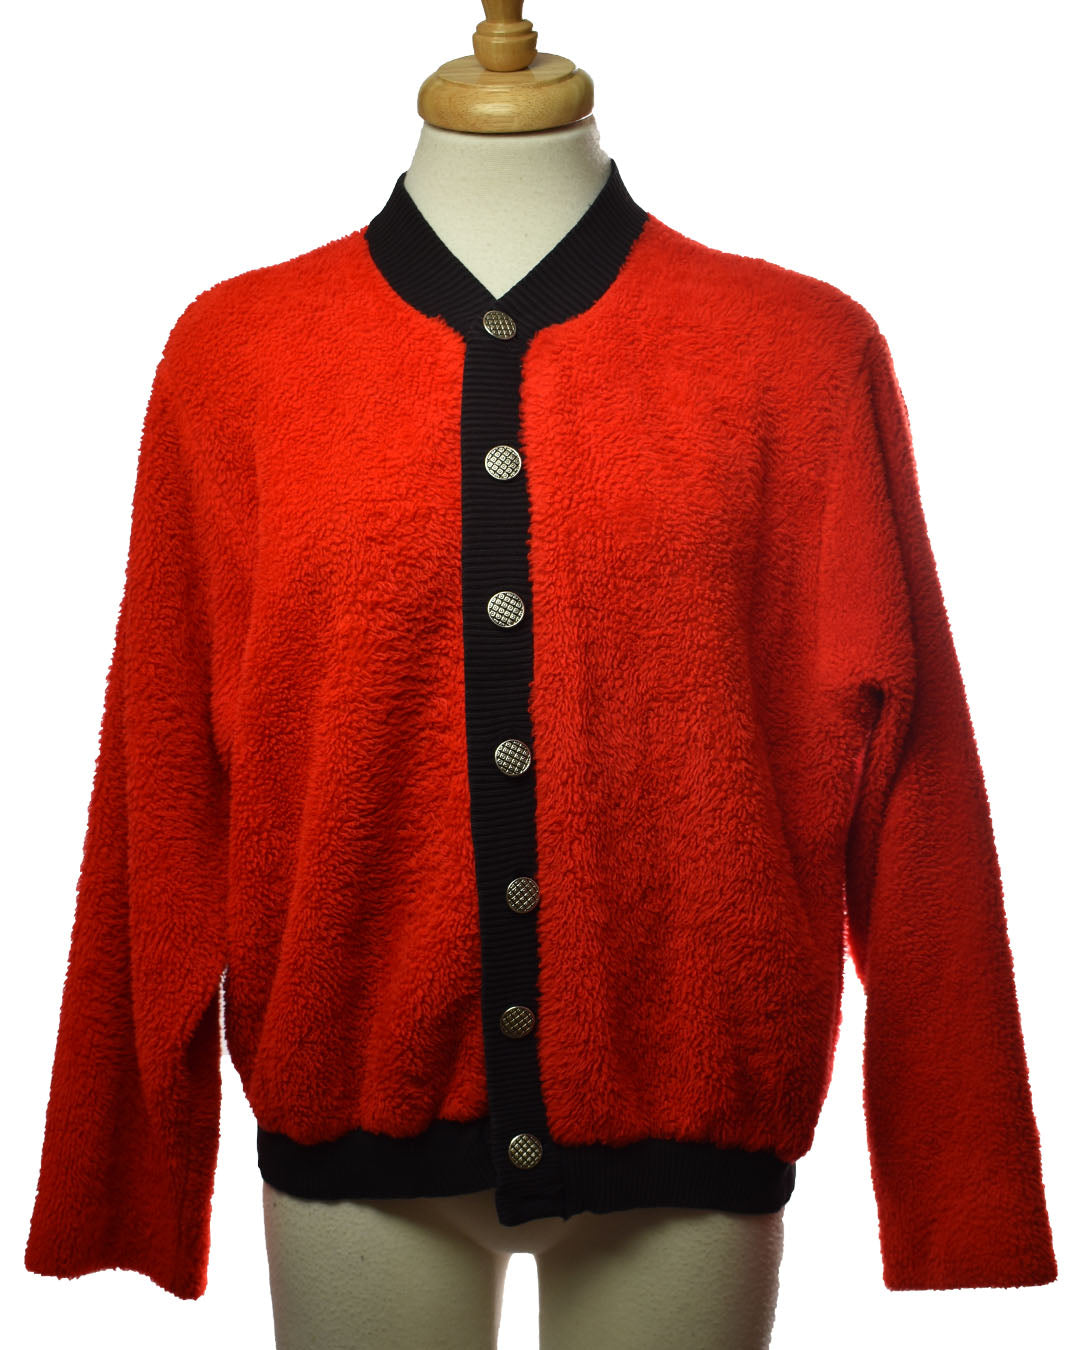 Vintage 60s Red Fuzzy Faux Fur Cardigan Sweater - Kodiak by Campus Made in USA Size L